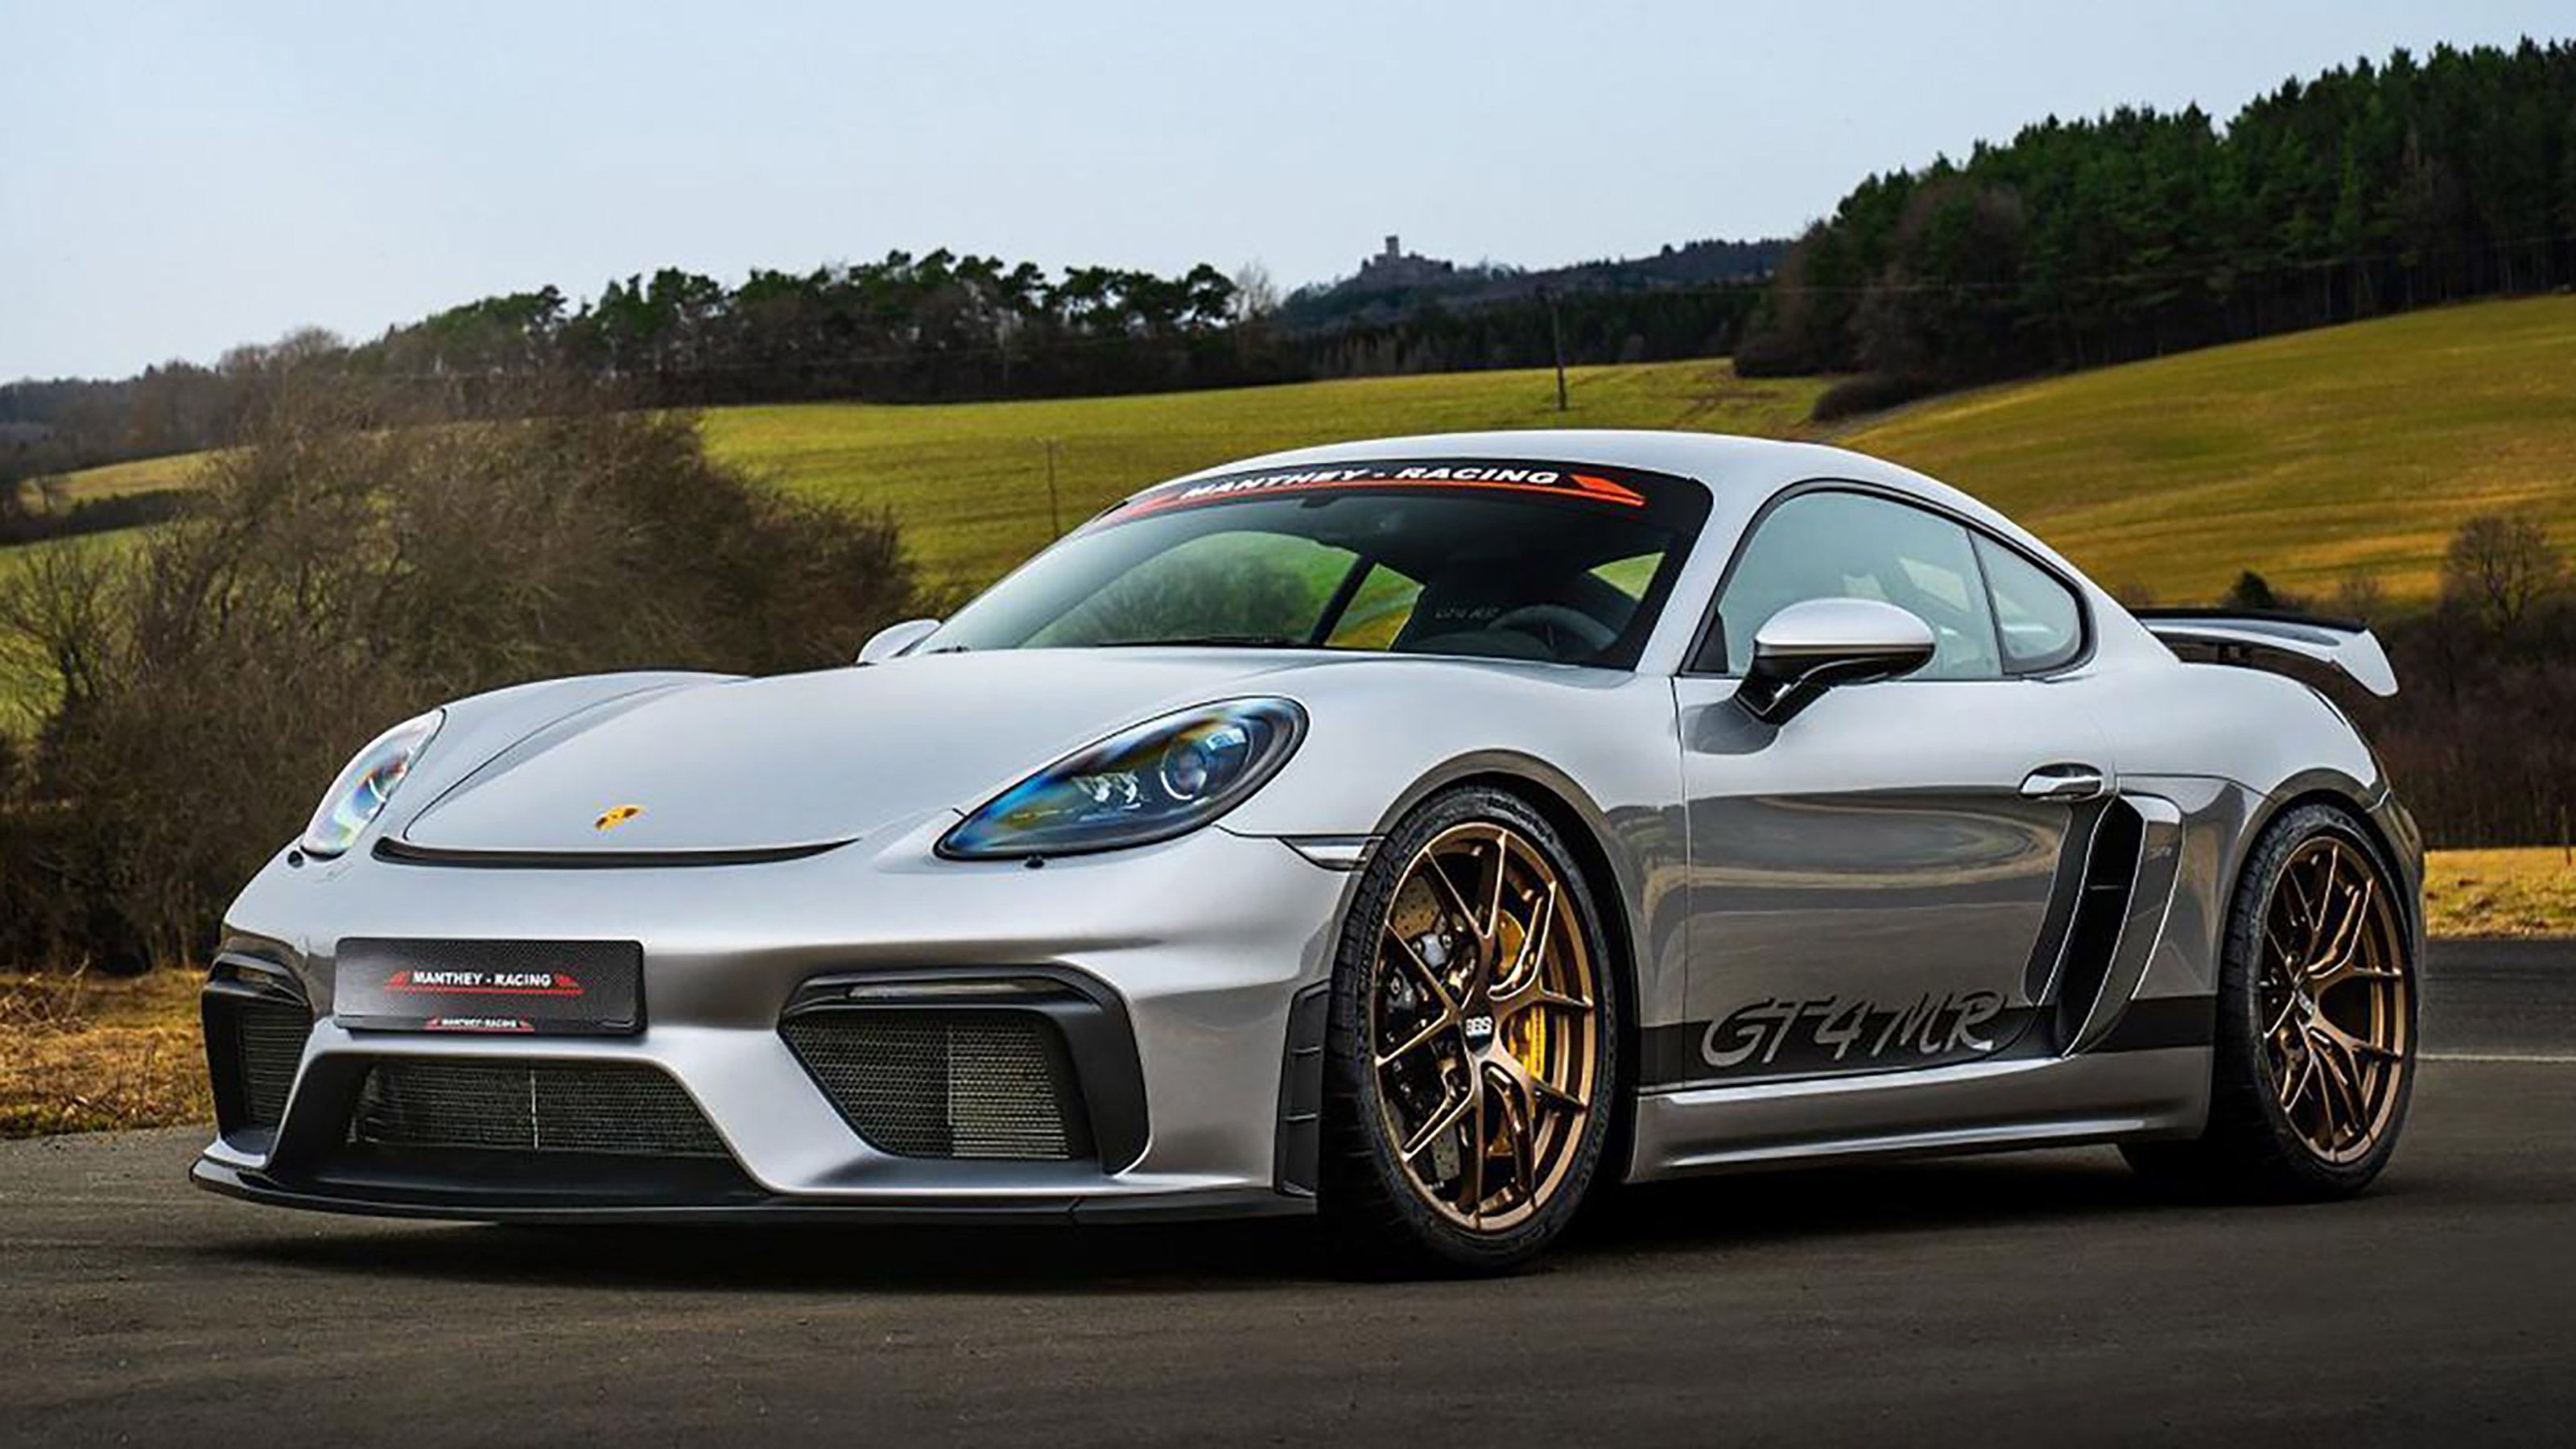 10 Things We Love About The Porsche Cayman GT4